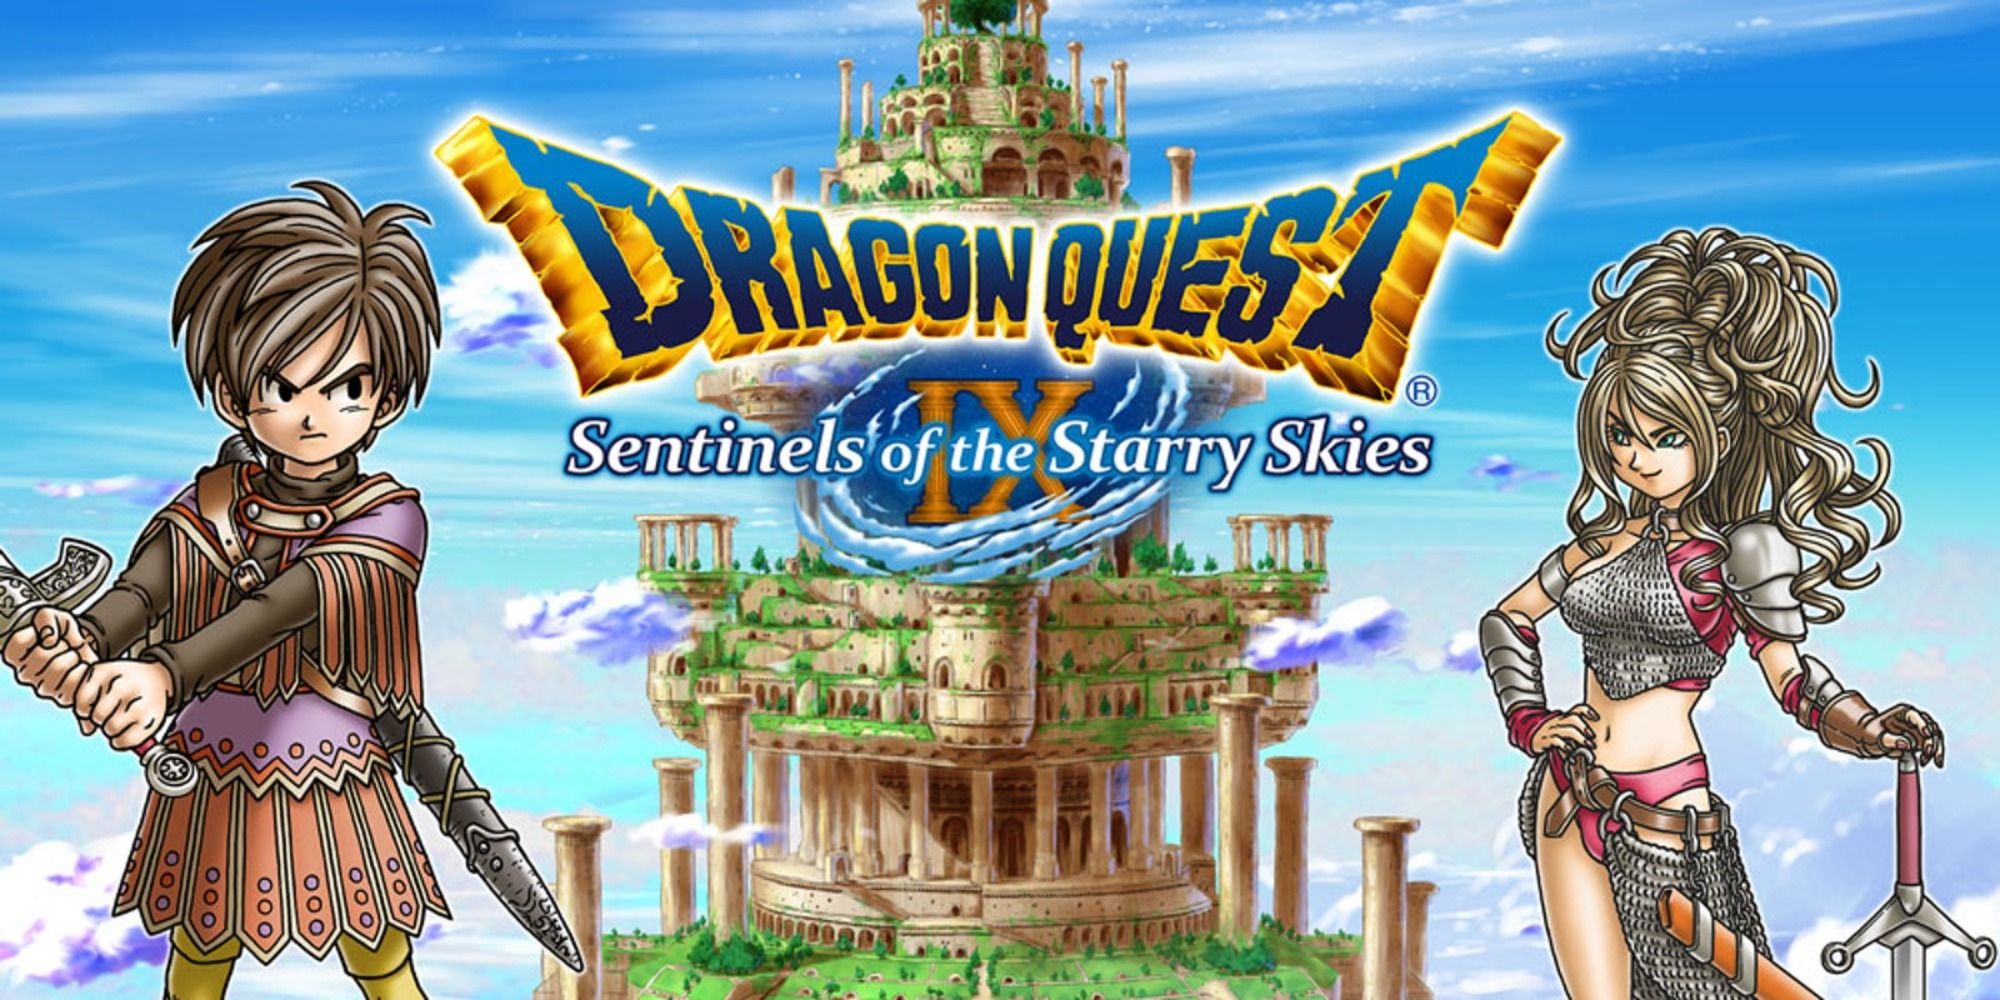 DS GamesDragon Quest IX Sentinels of the Starry Skies